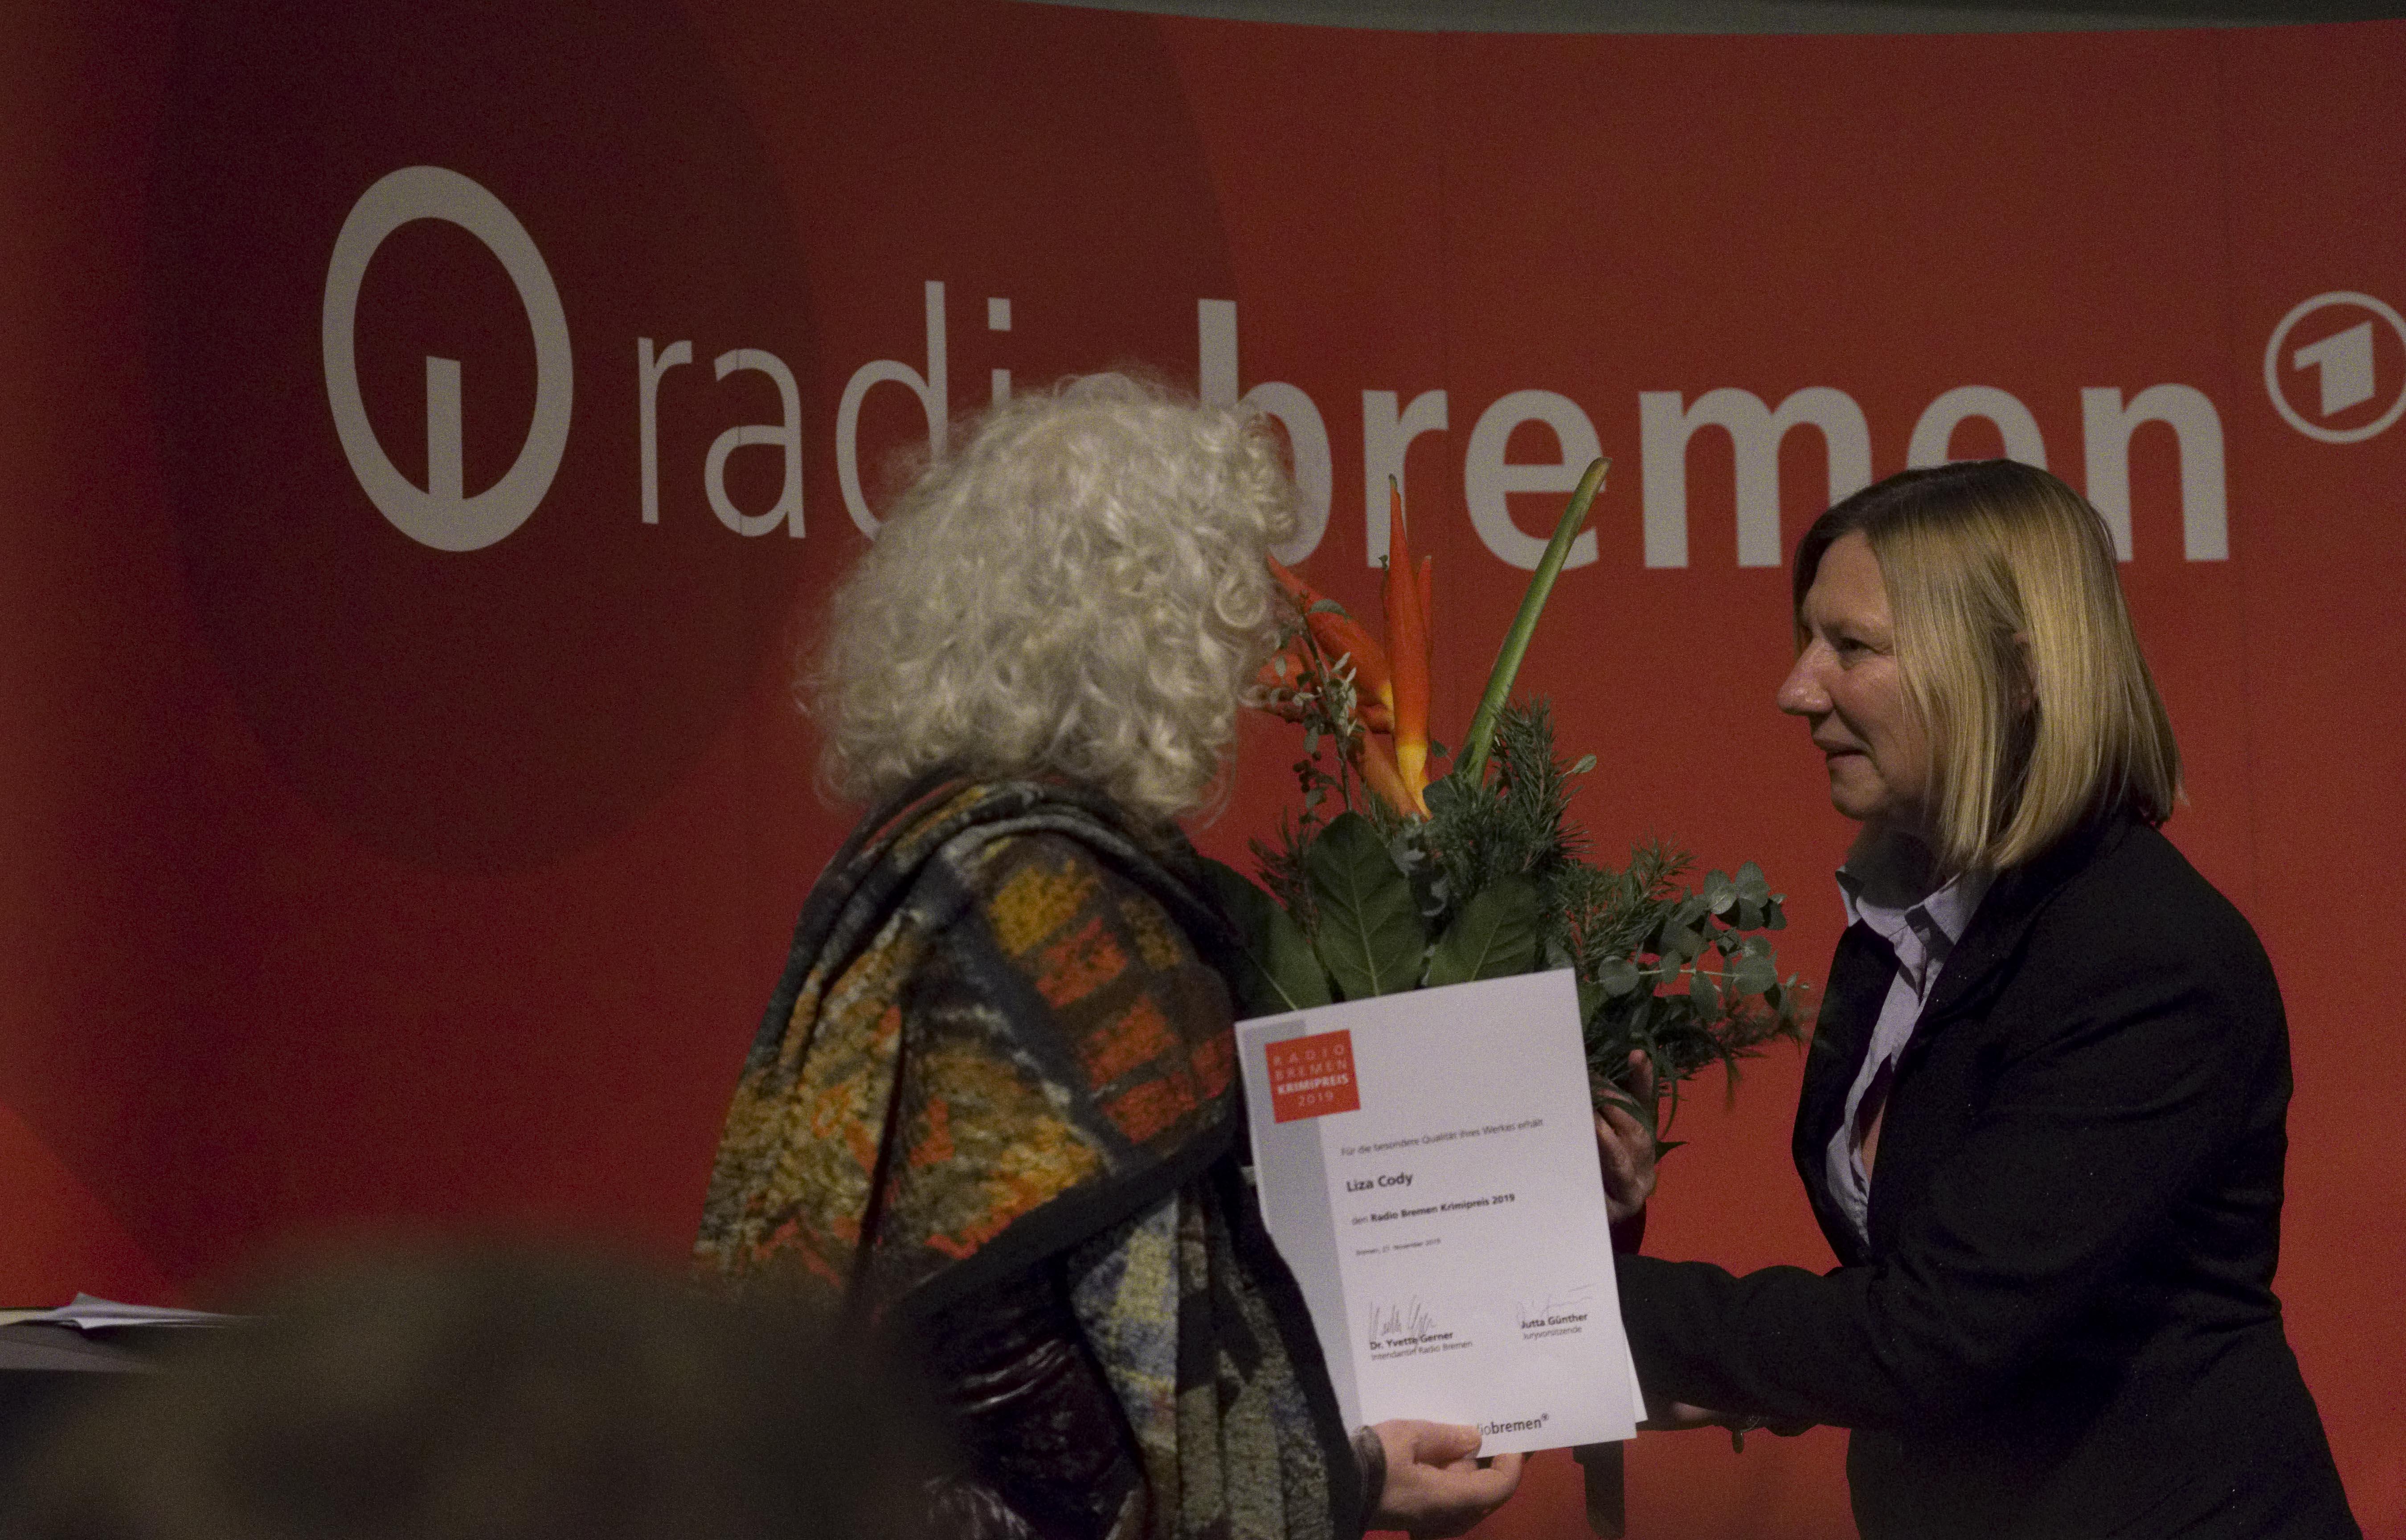 ﻿I'm given the 2019 Crime Writing Prize given by Bremen radio. What an honour and privilege. Thank you everyone involved. 27 November 2019